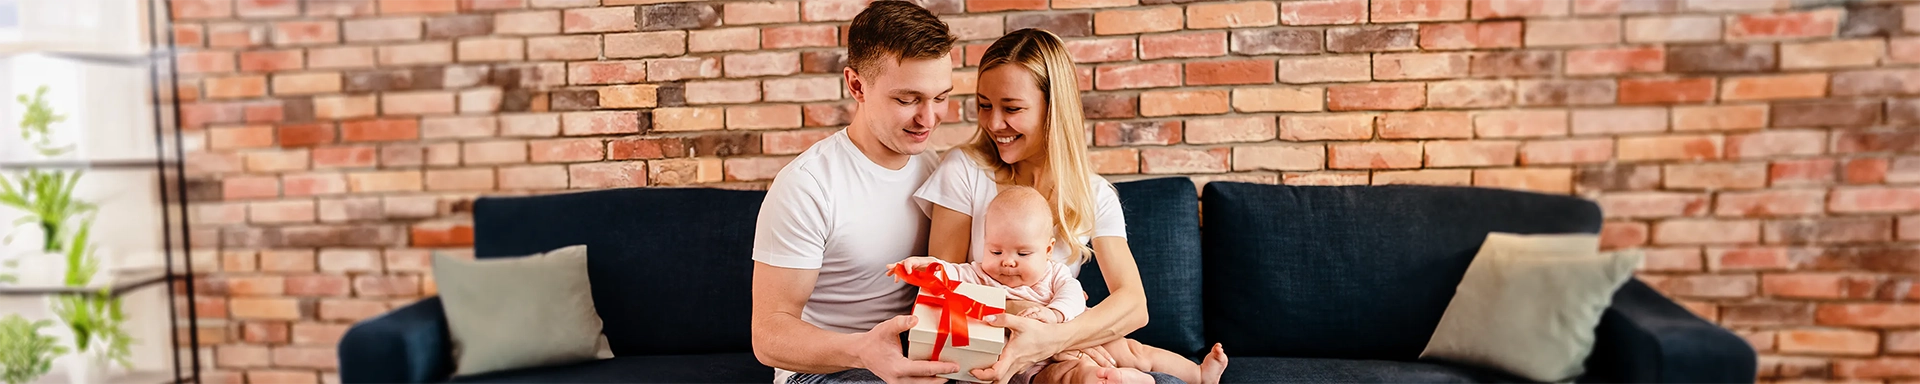 First Father’s Day Gifts | Gifts For New Dads